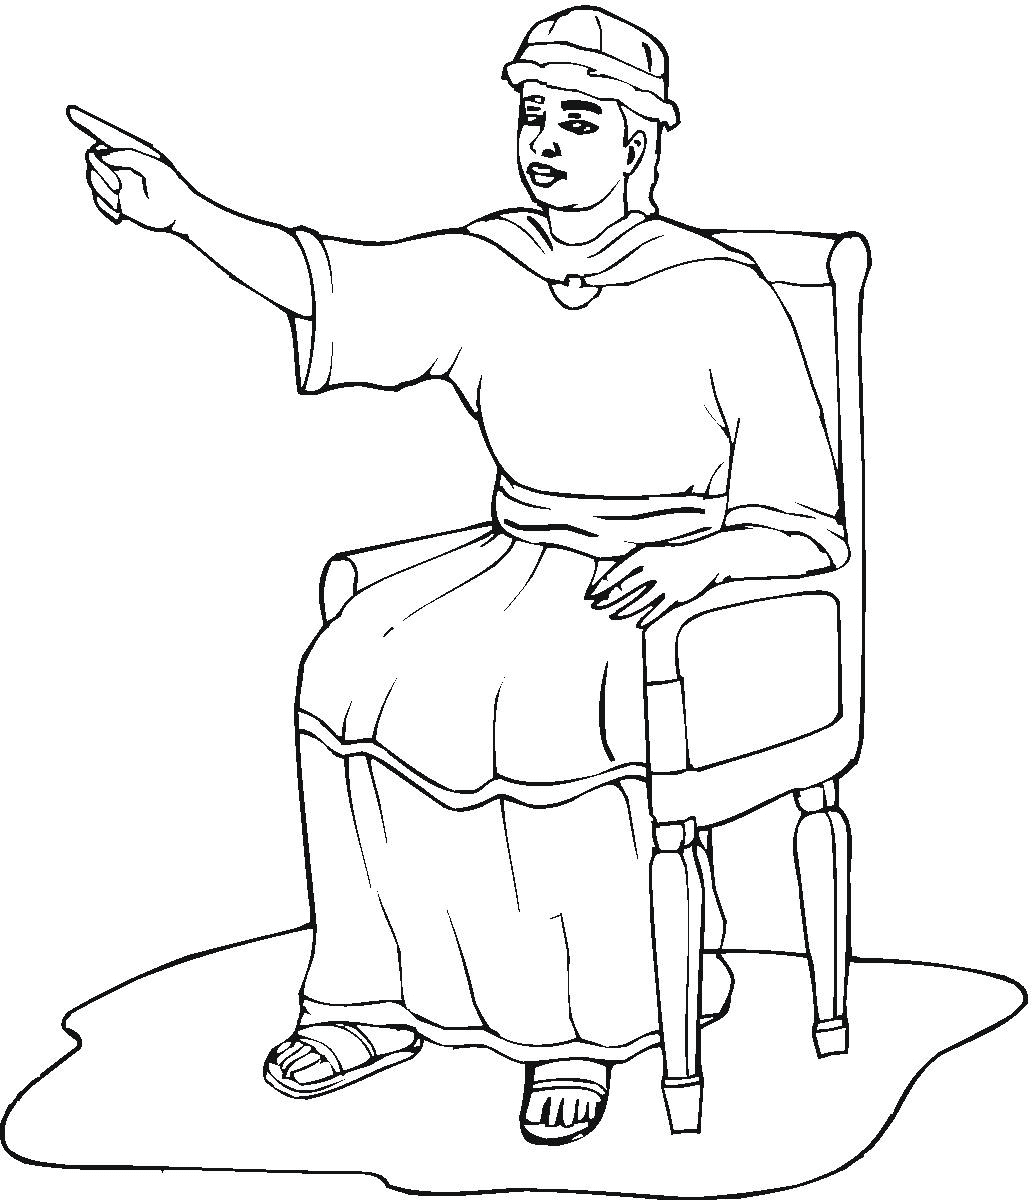 King Solomon Coloring Page